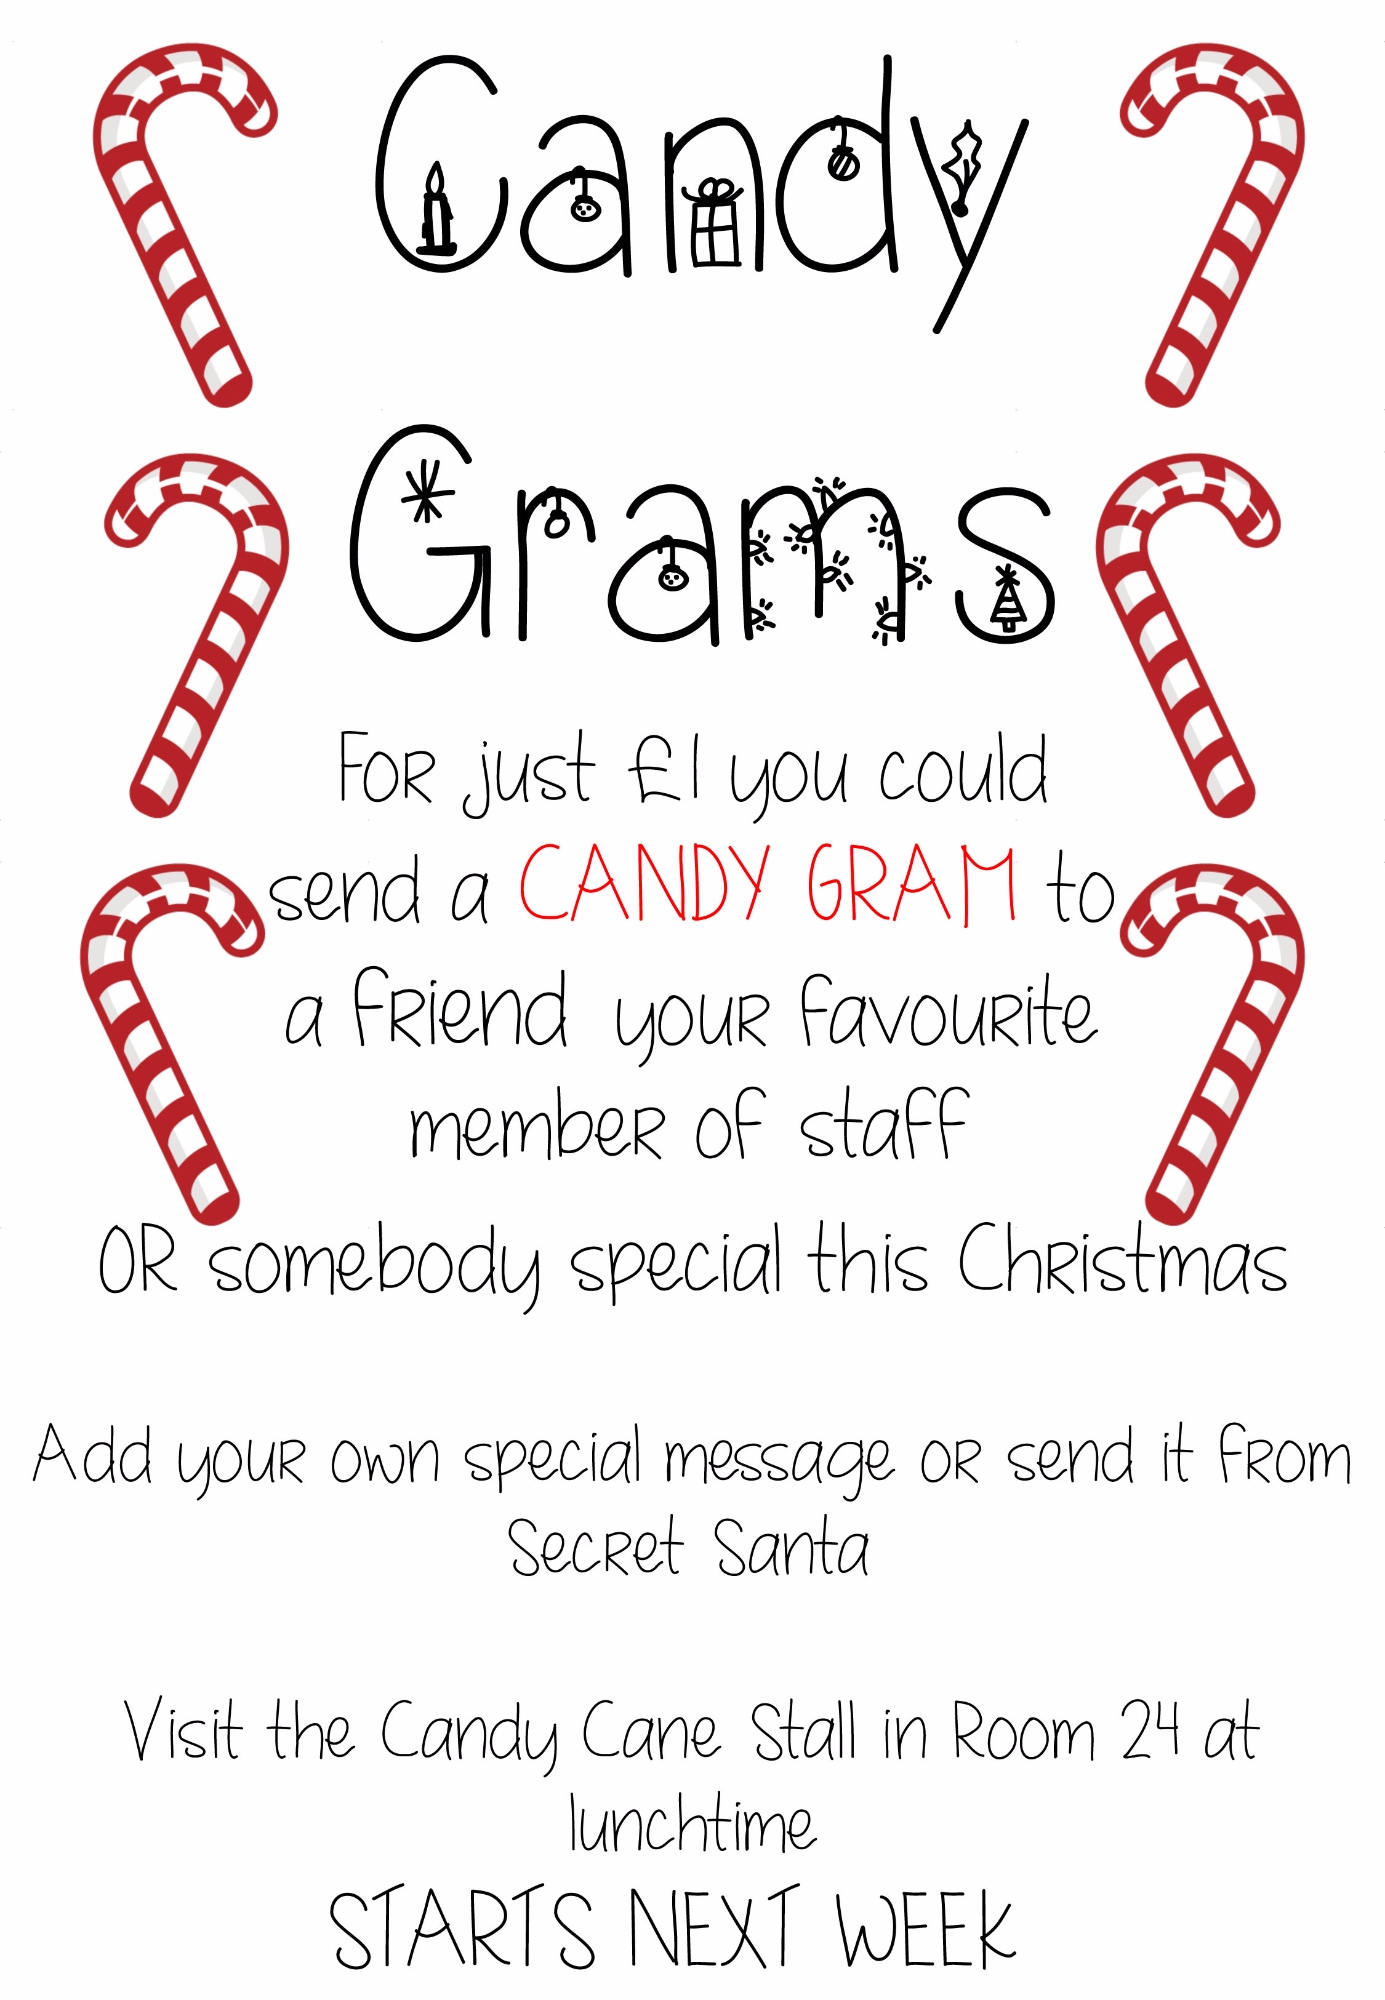 Free Printable Candy Cane Gram Template